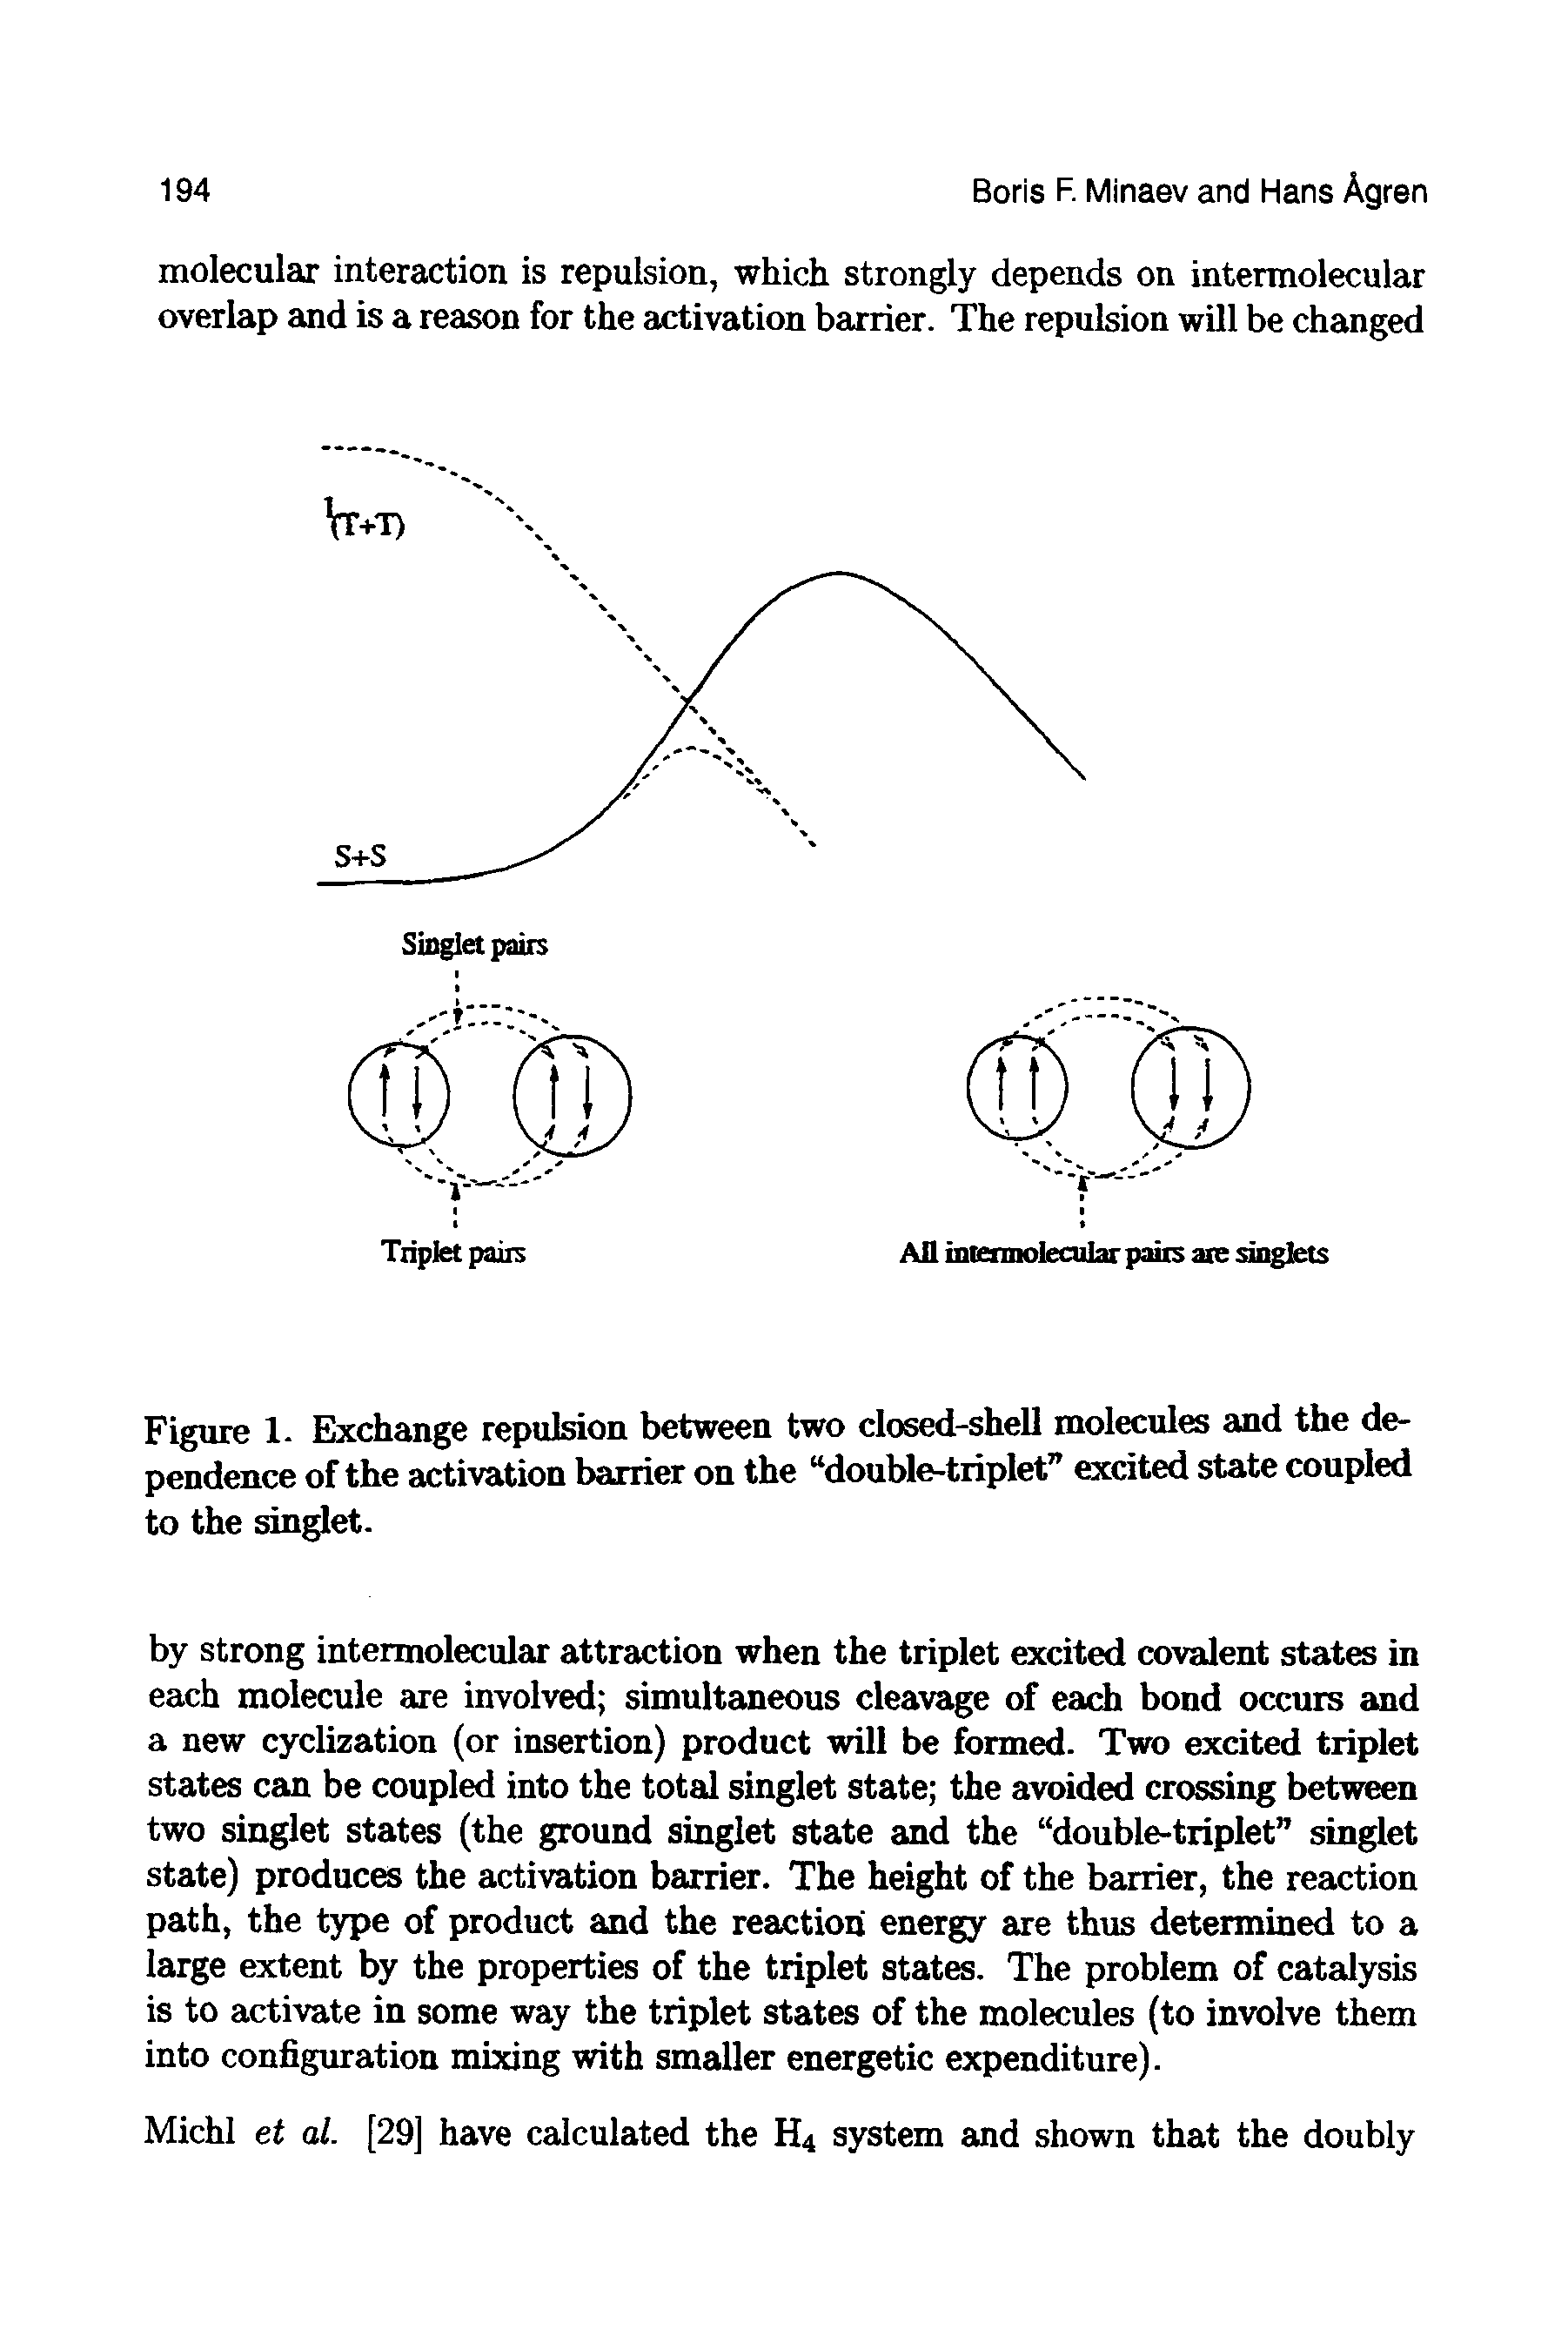 Figure 1. Exchange repulsion between two closed-shell molecules and the dependence of the activation barrier on the double-triplet excited state coupled to the singlet.